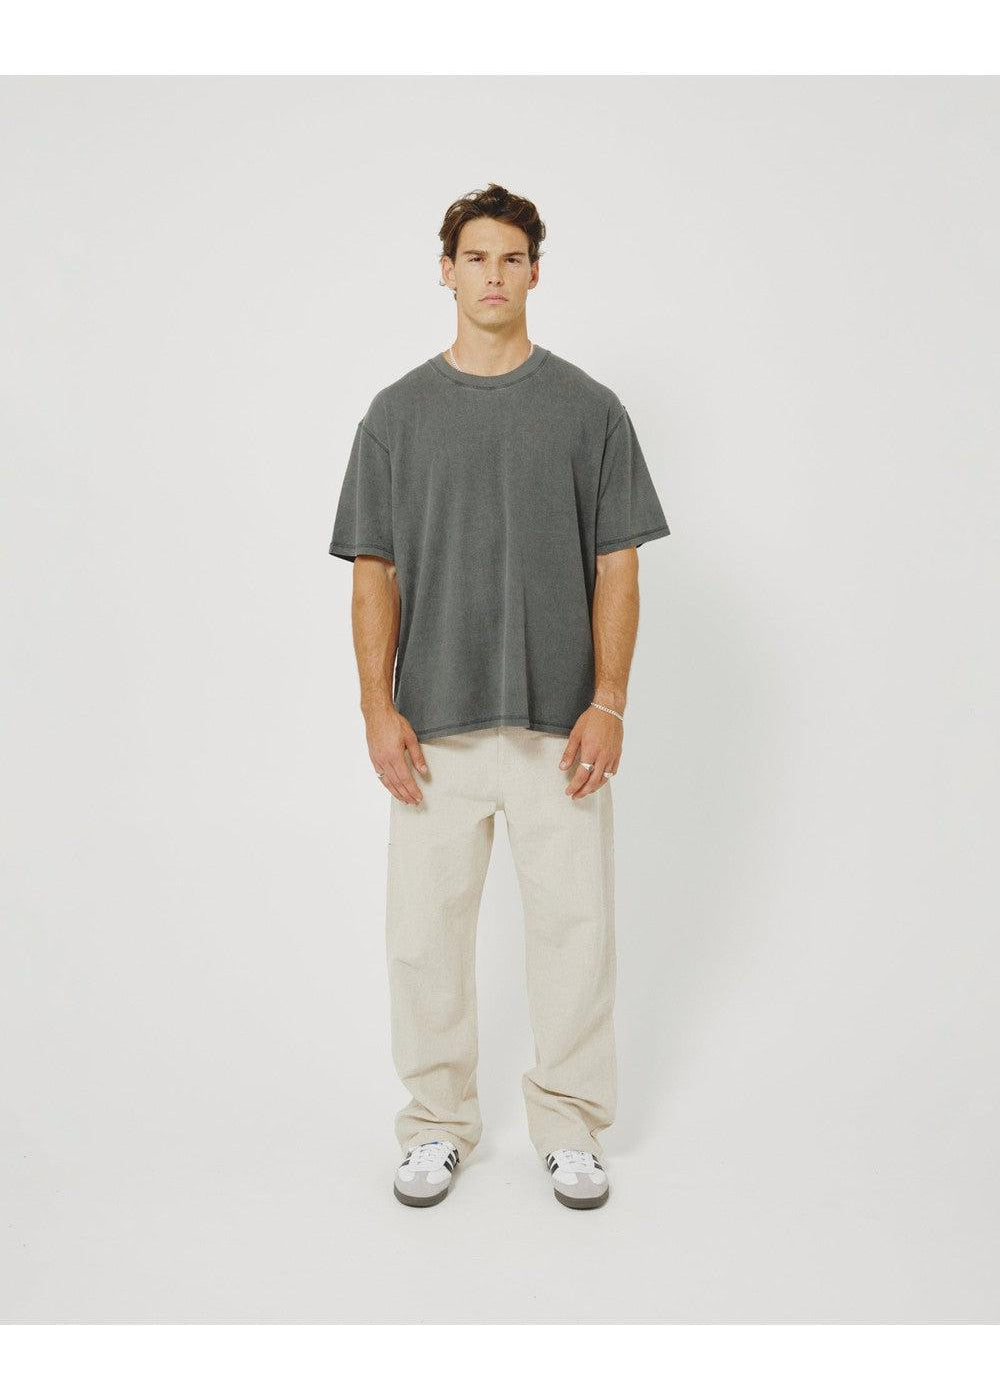 Commoners Hemp Jersey SS - Vintage Grey | COMMONERS | Mad About The Boy